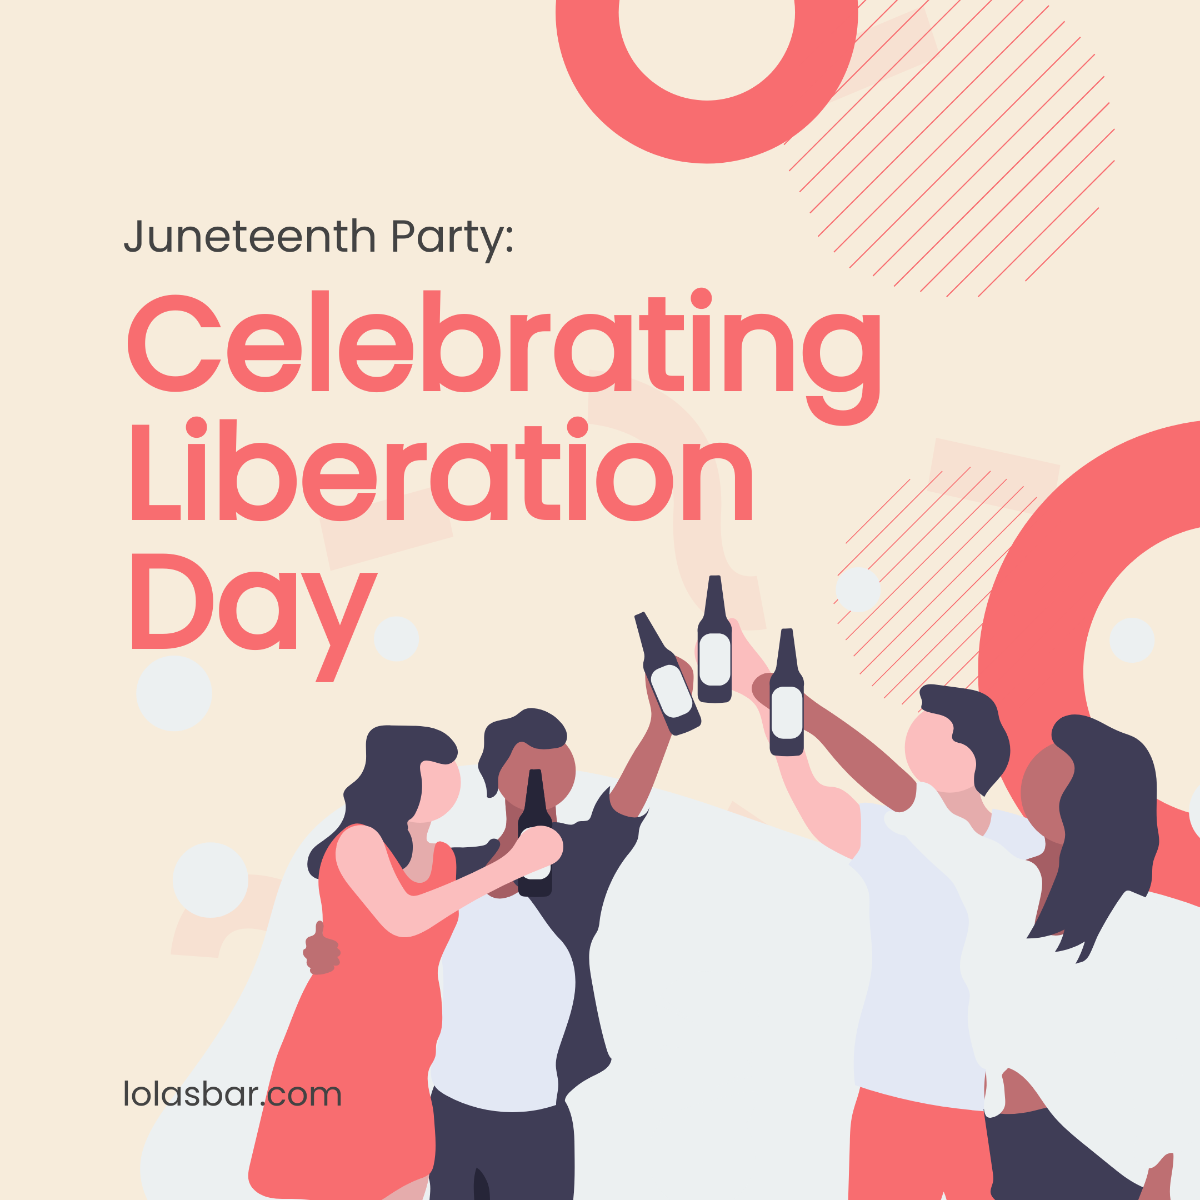 Free Juneteenth Party Instagram Post Template